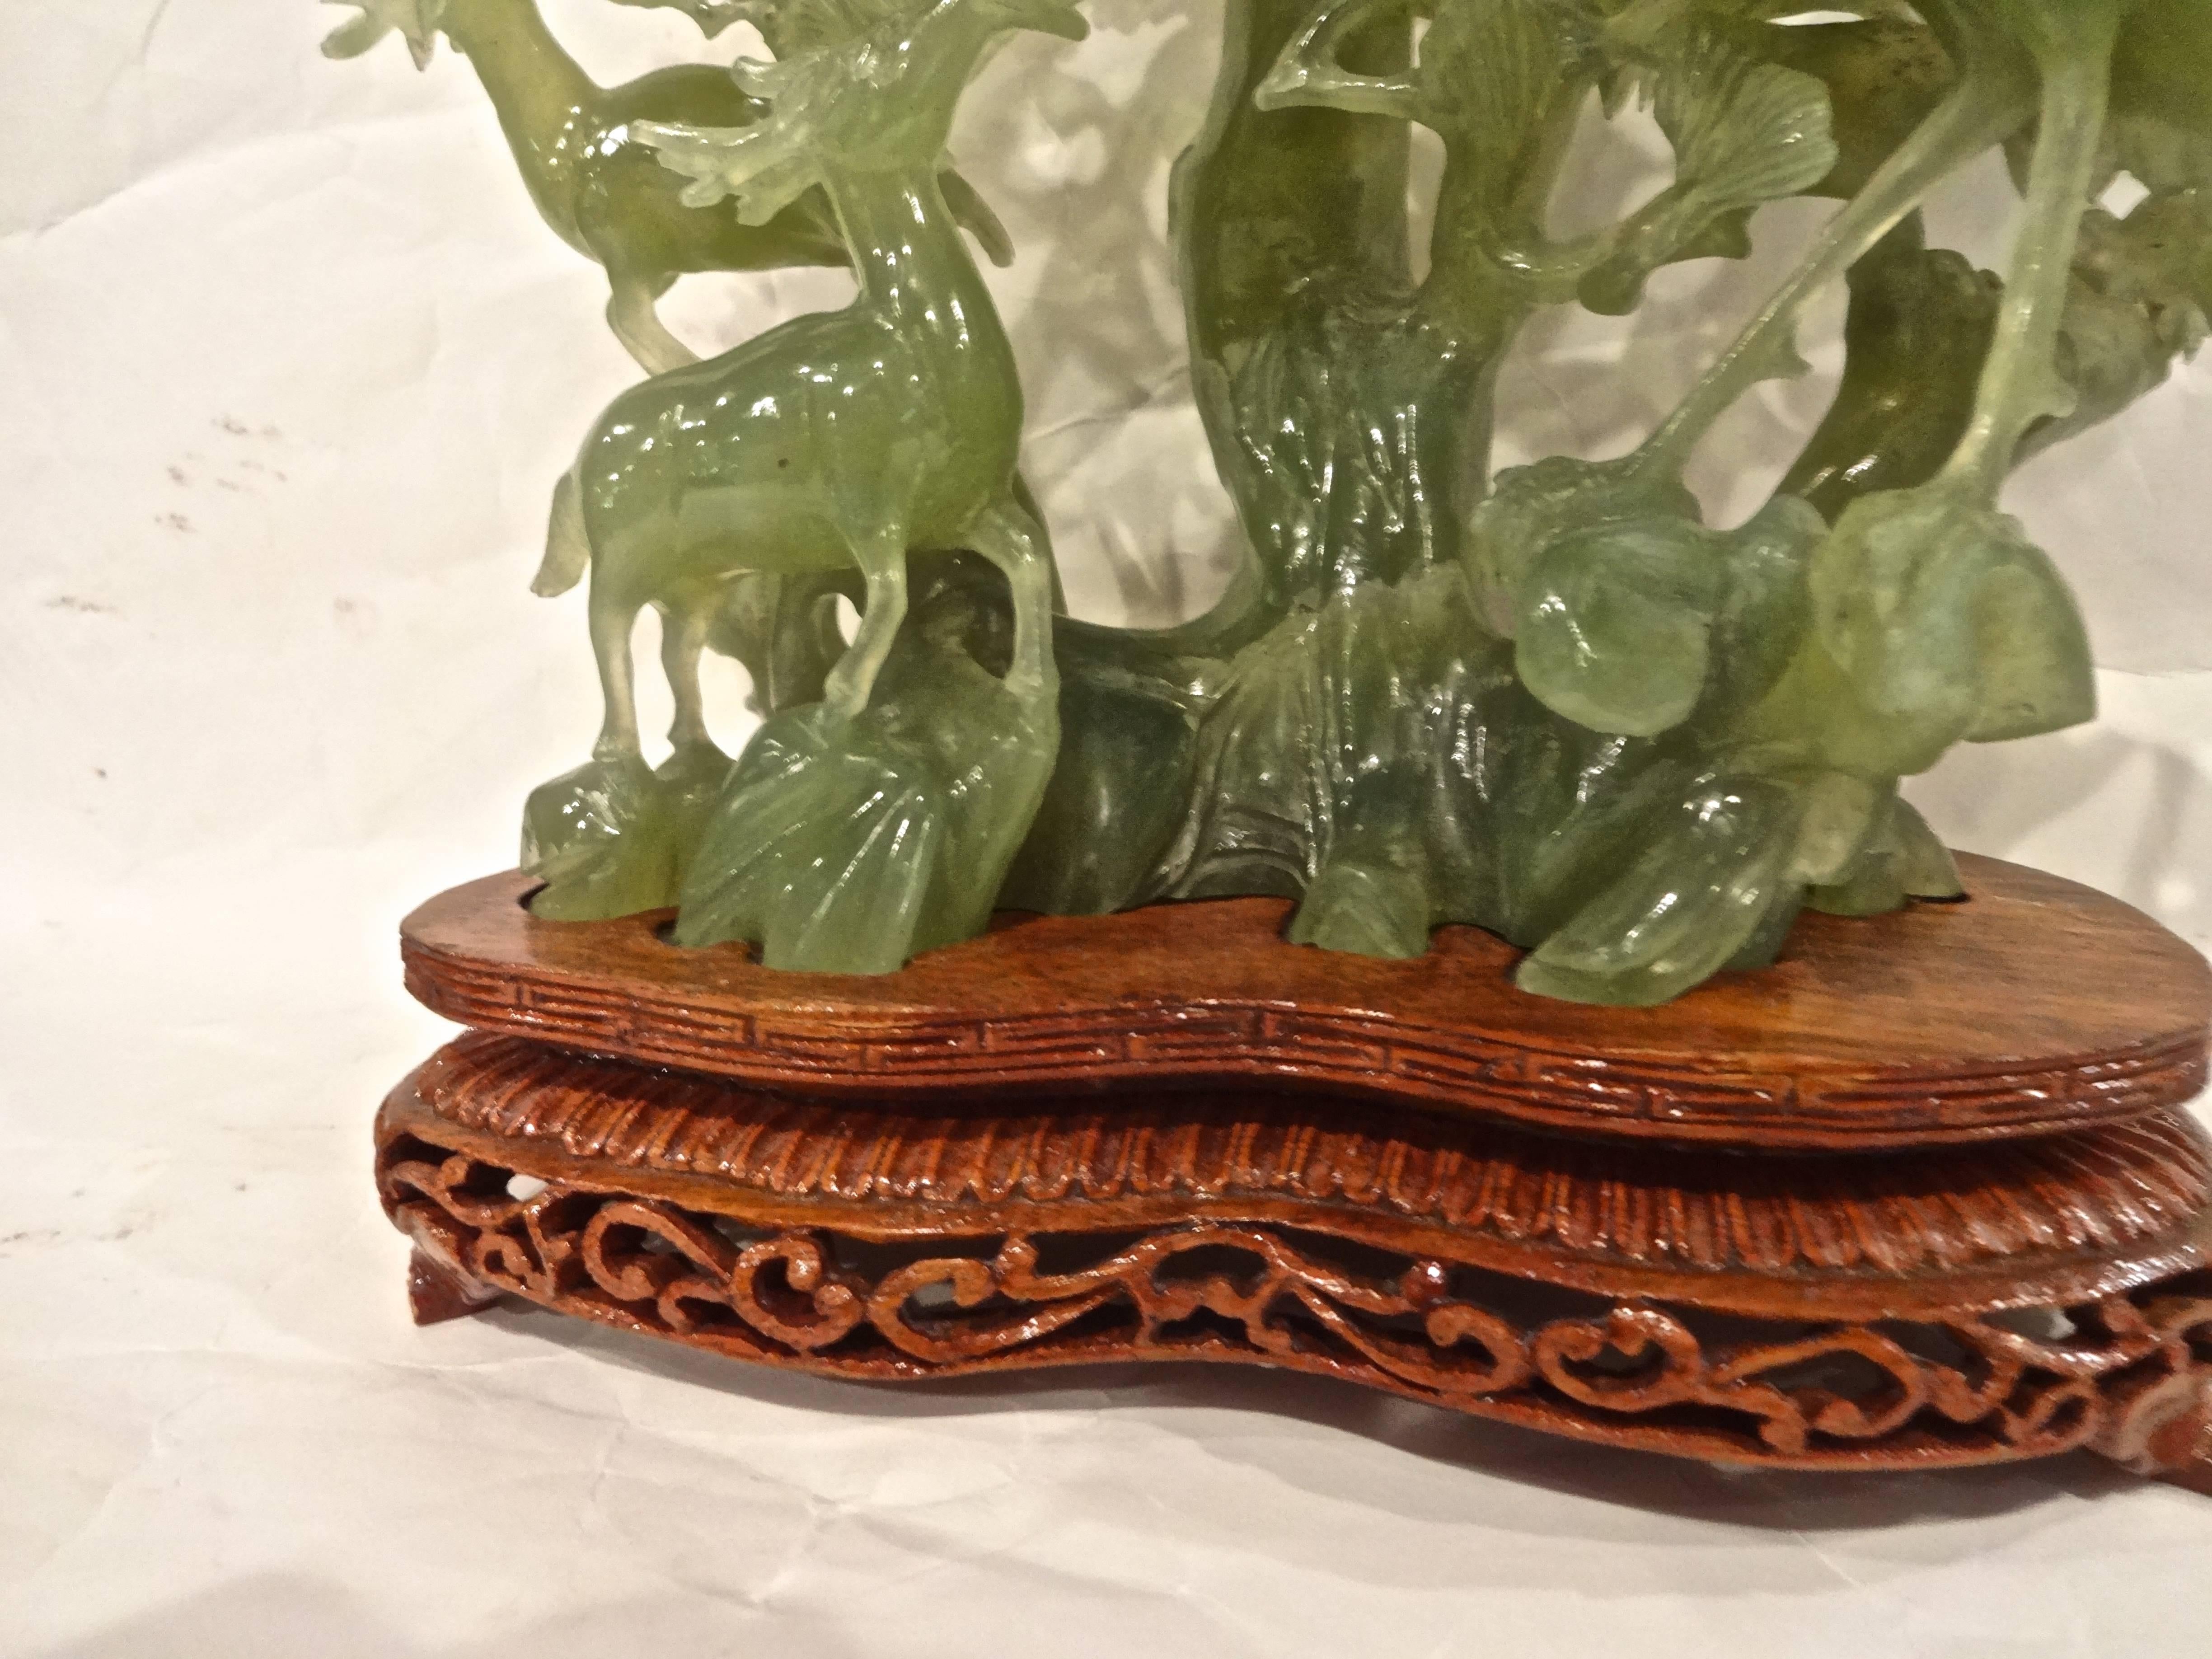 A Chinese jade carving of birds, fauna and deer on custom hand-carved stand.